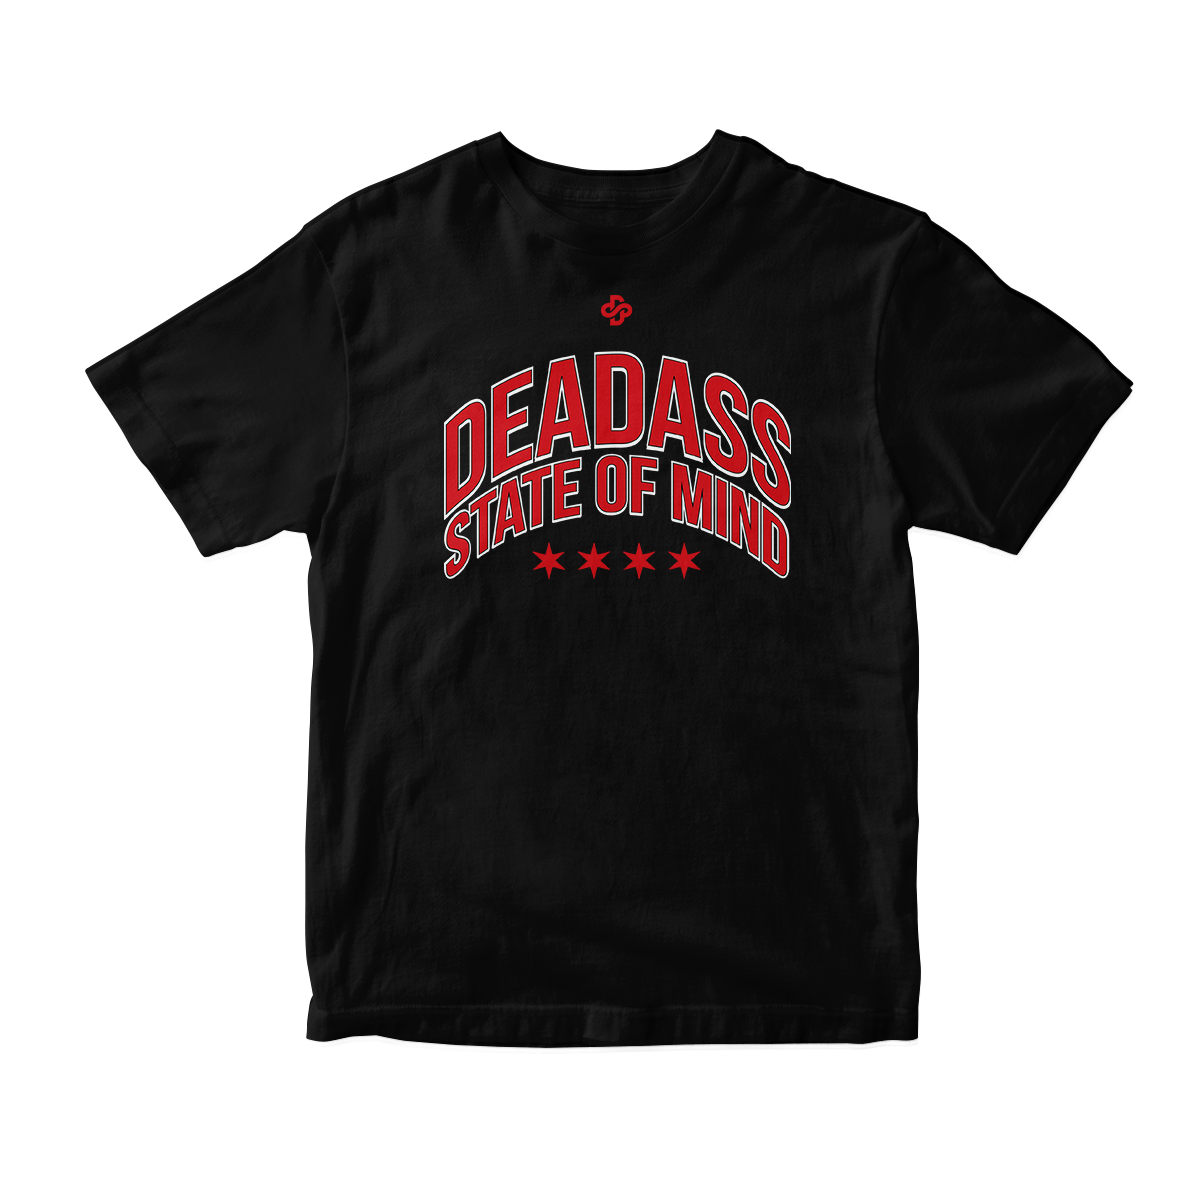 'Deadass State of Mind' in Gym Red CW Unisex Short Sleeve Tee